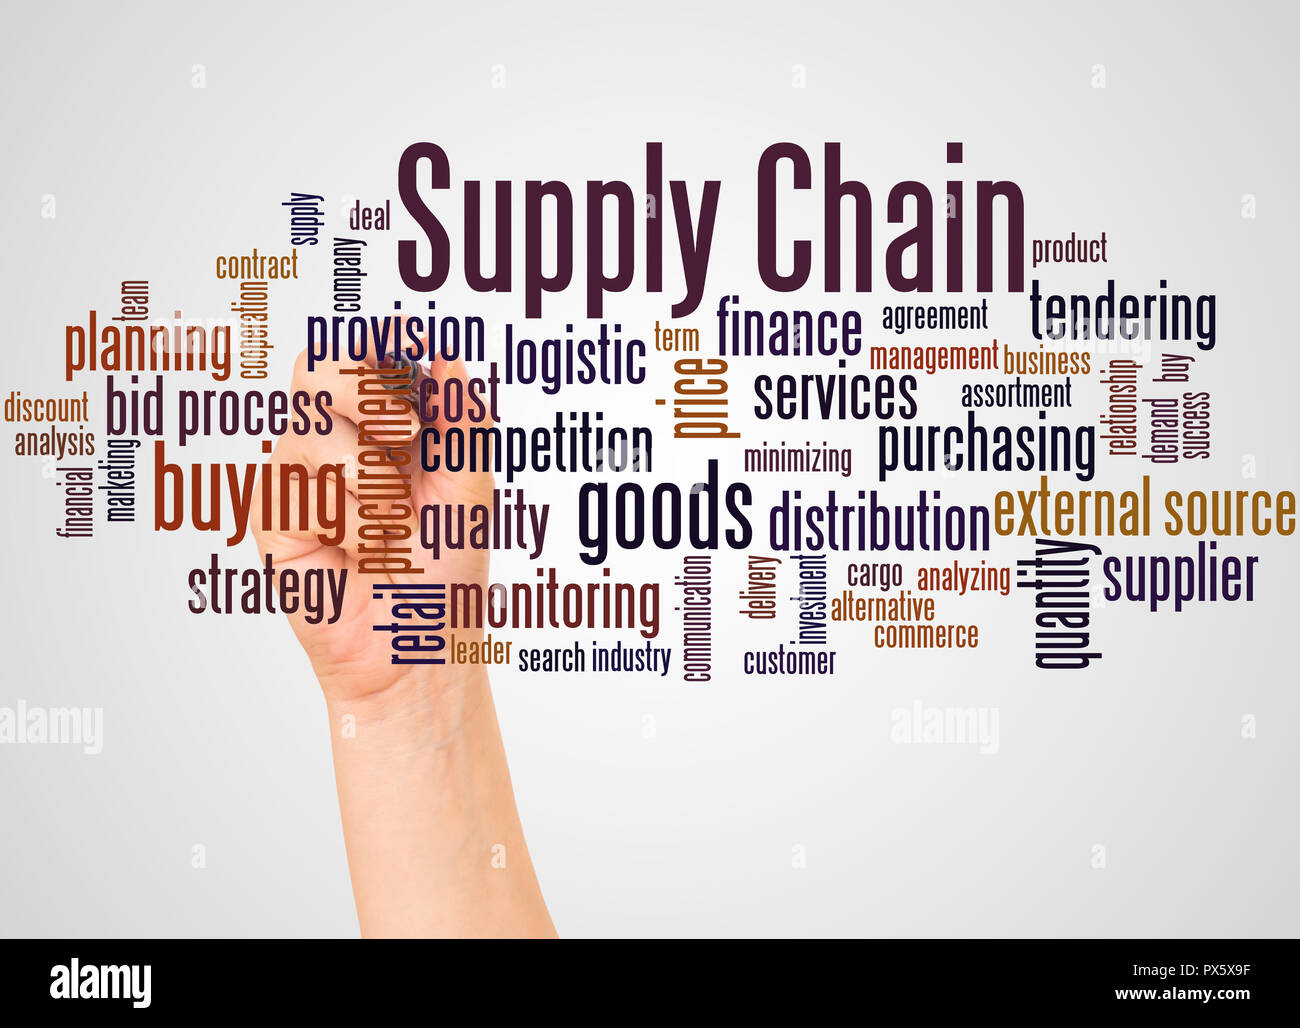 Supply Chain word cloud and hand with marker concept on gradient background Stock Photo